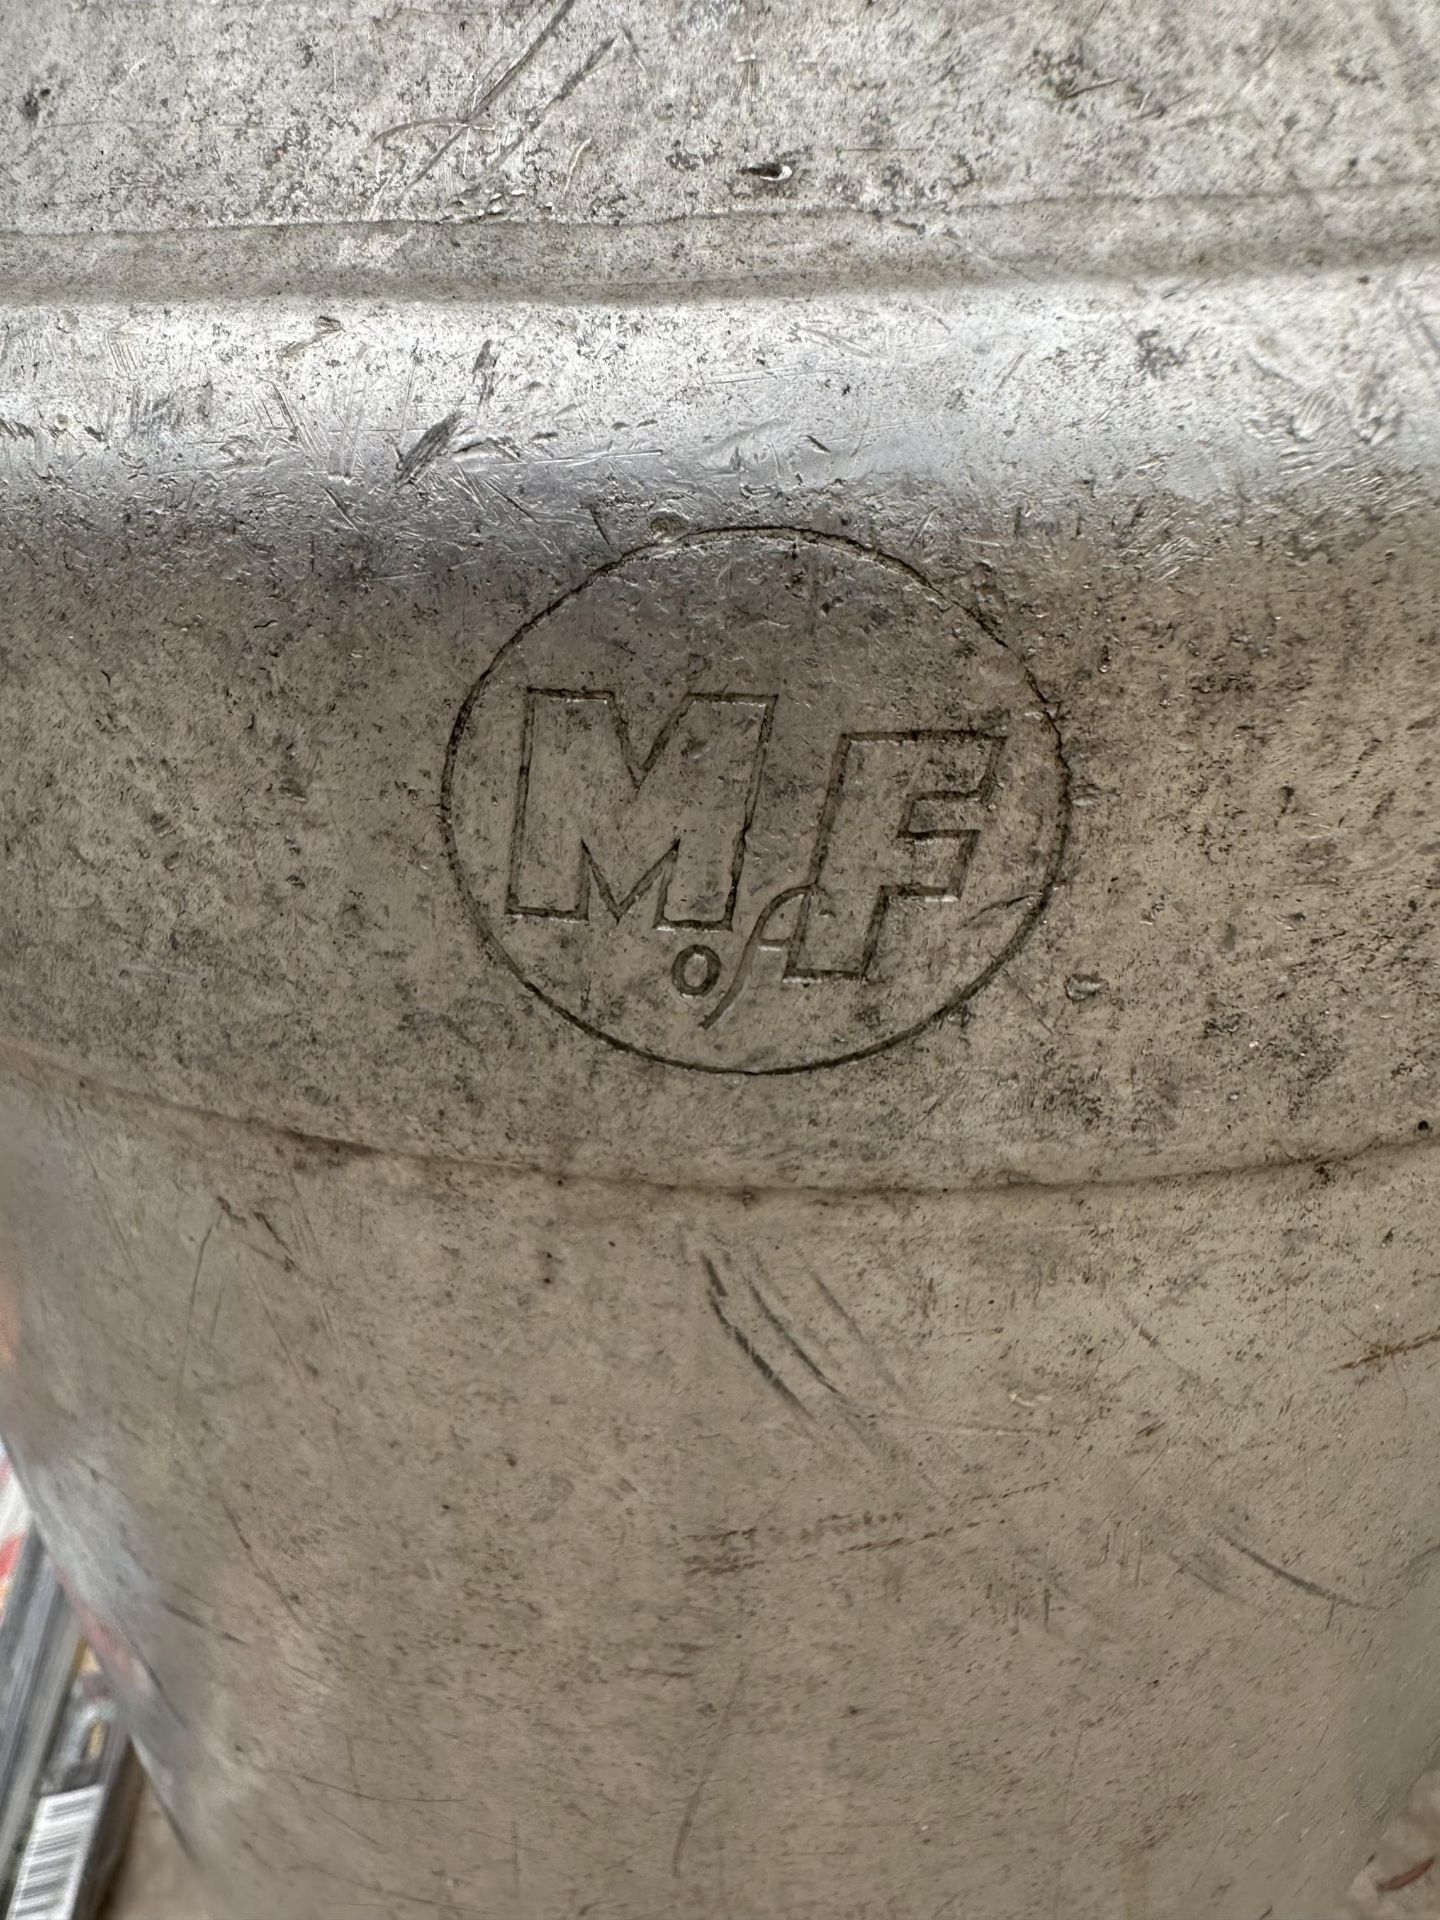 A STAINLESS STEEL MILK CHURN BEARING A STAMP 'M OF F' - Image 2 of 2